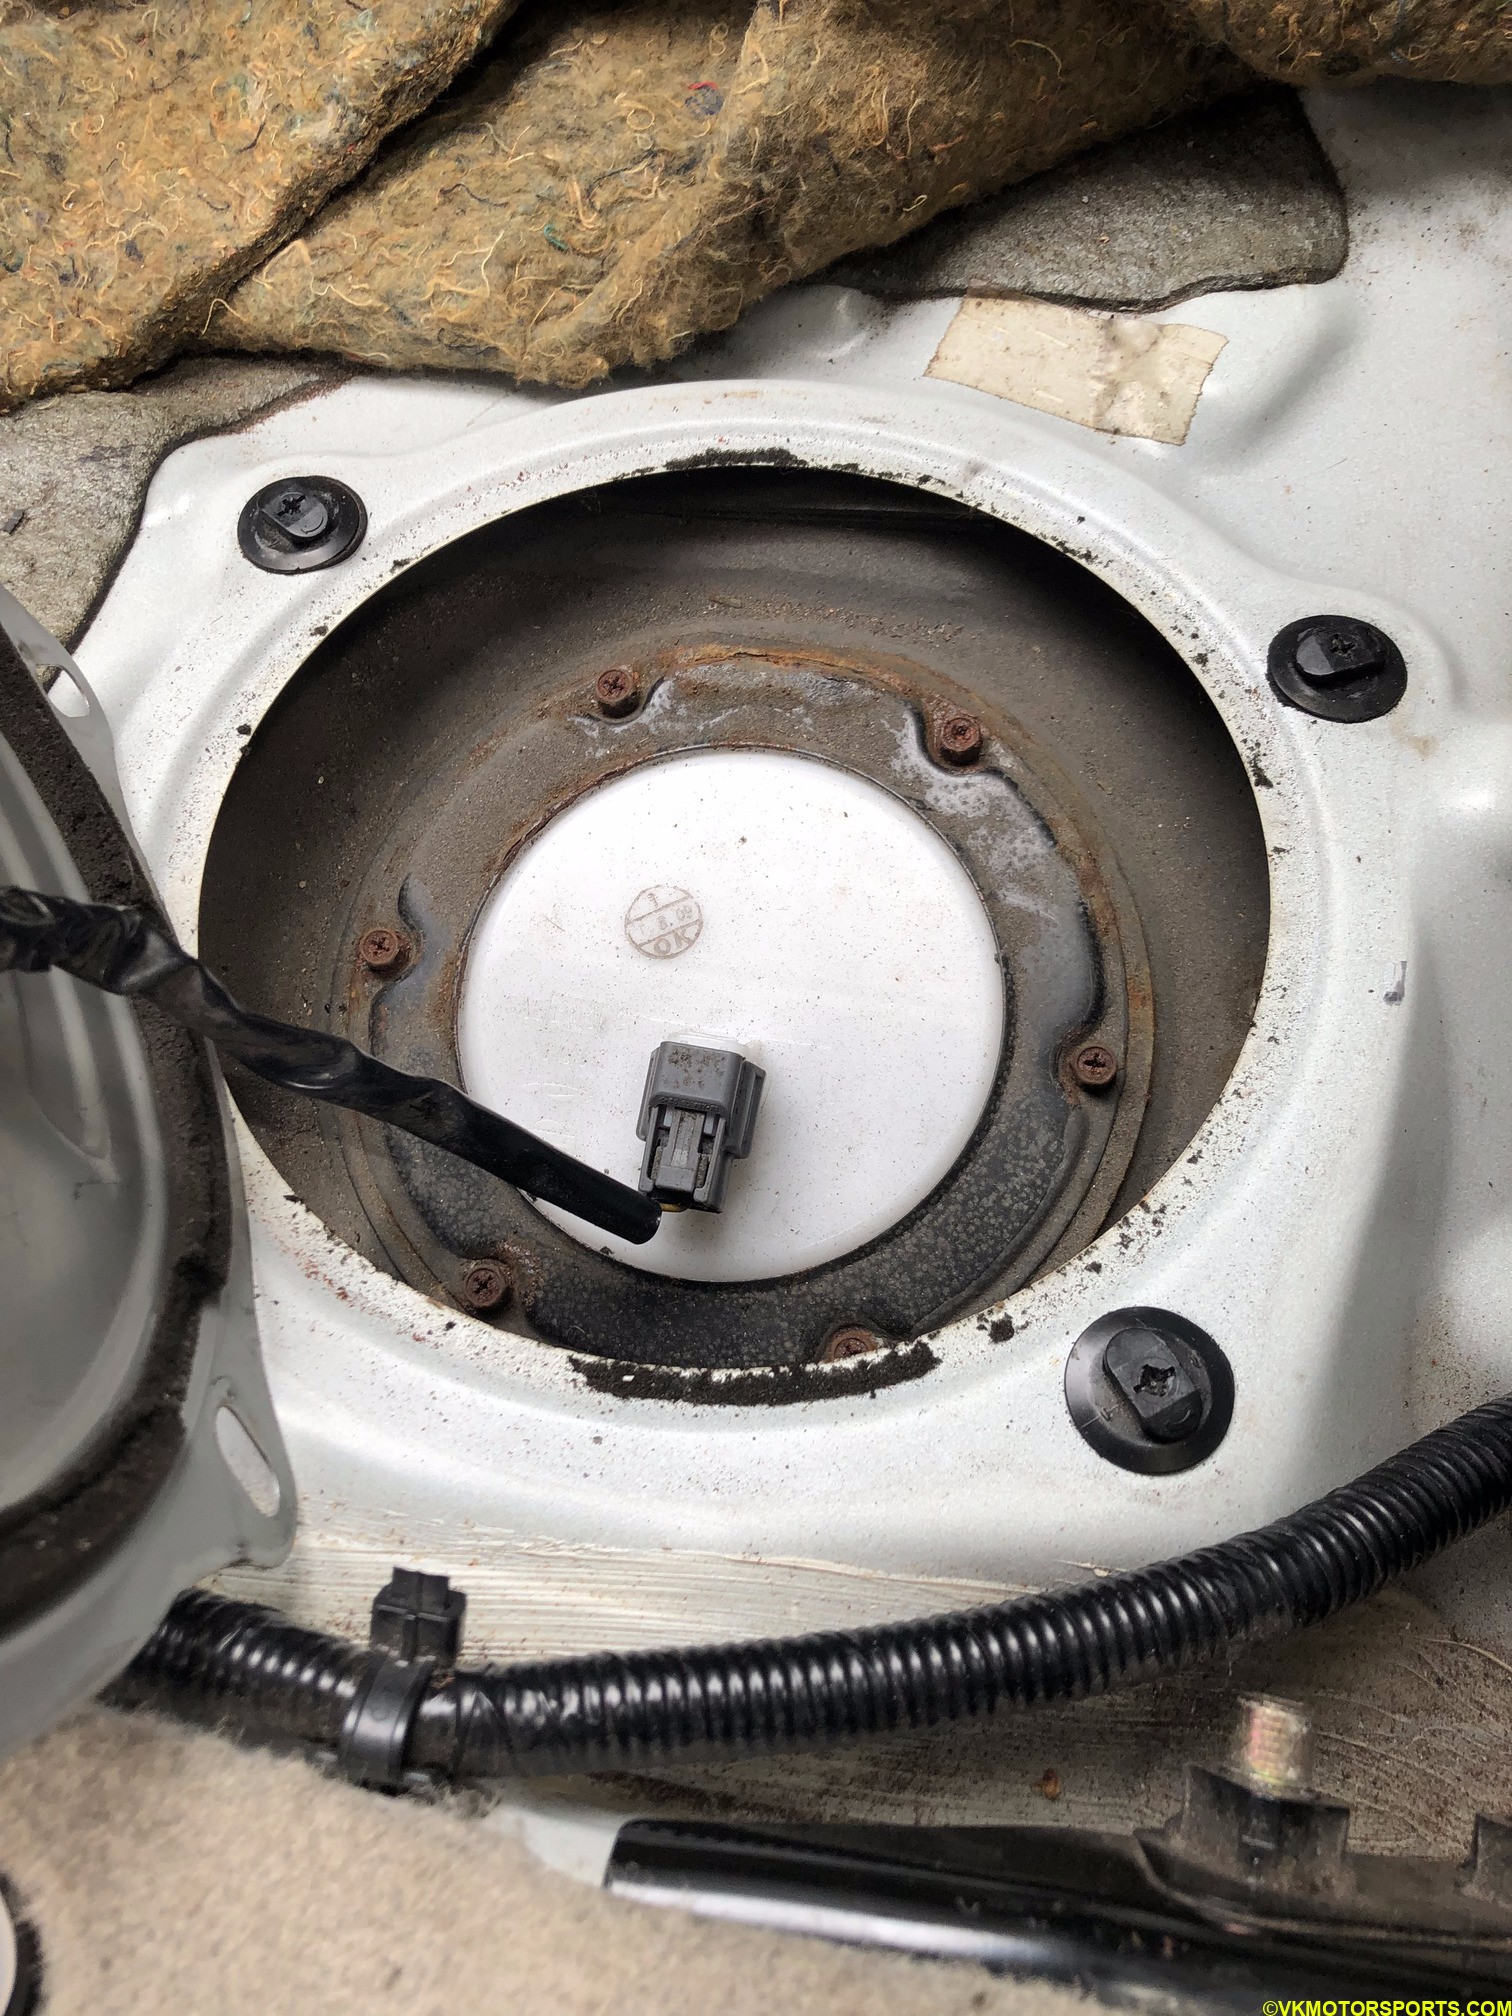 Figure 5. Outer cover removed to show the fuel sensor attached to the tank